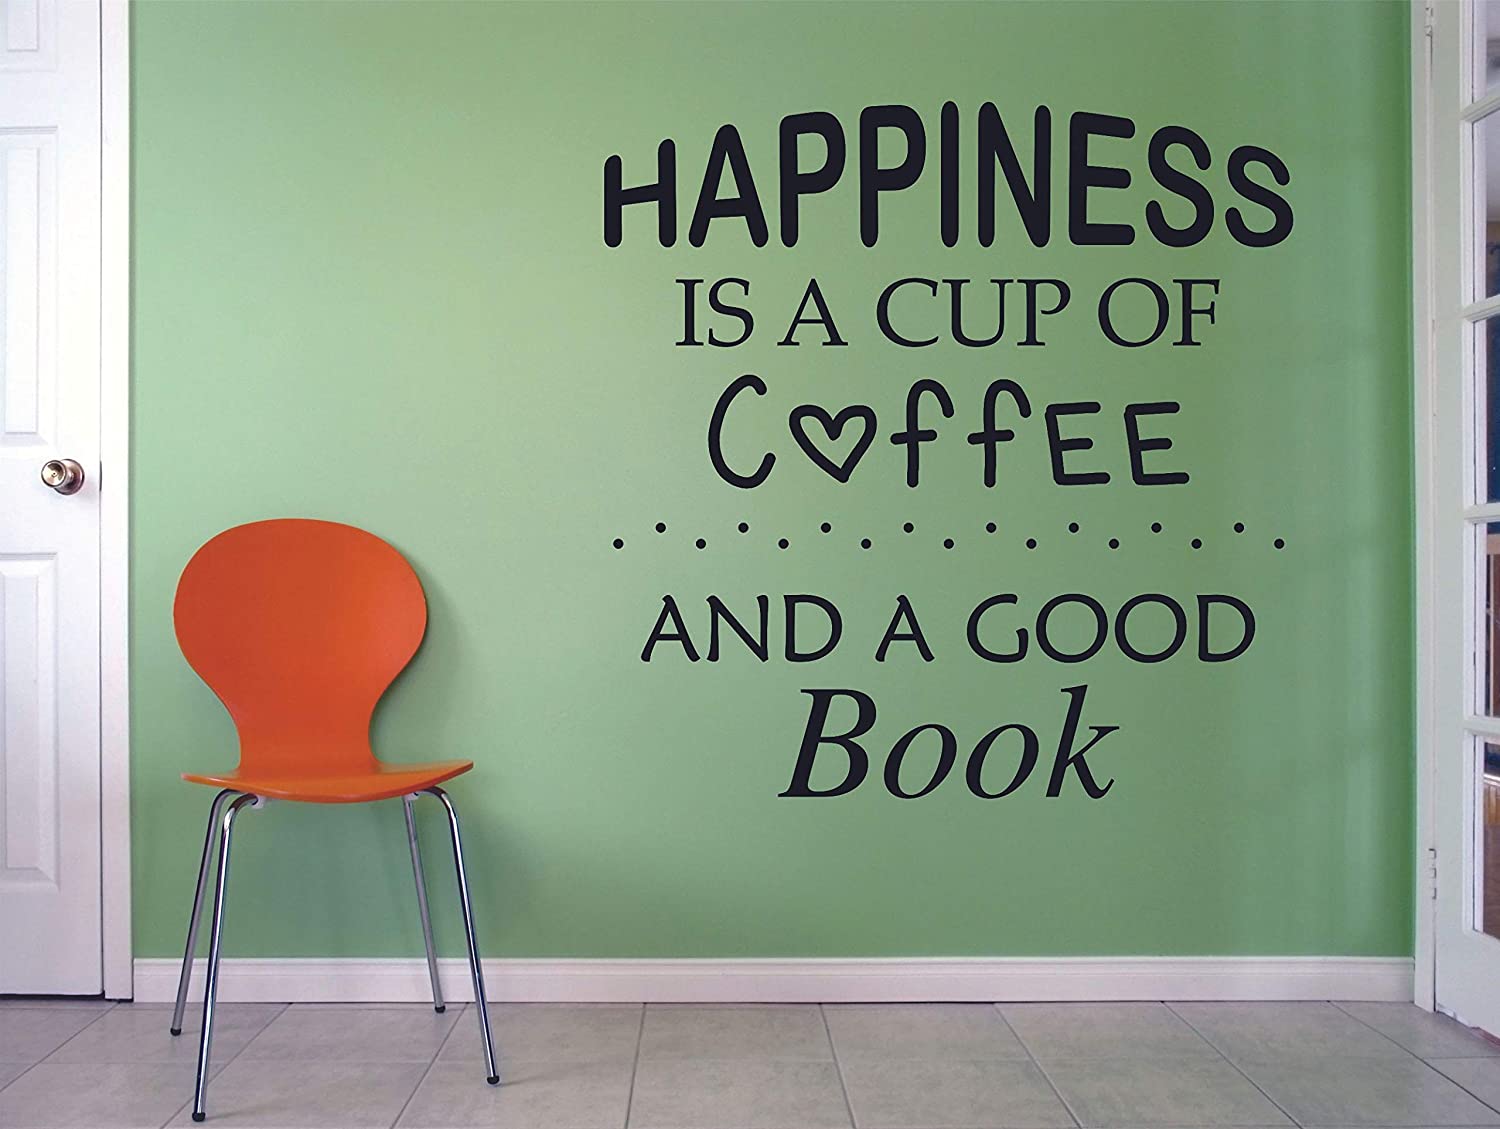 Happiness Is A Cup Of Coffee And A Good Book - Coffee Quotes Wall Stickers Cappuccino Mocha Latte Decor for Kitchen Dining Kitchen Cafe Wall Decals Stickers Wall Art Vinyl Decoration Size (10x10 inch) - image 2 of 3